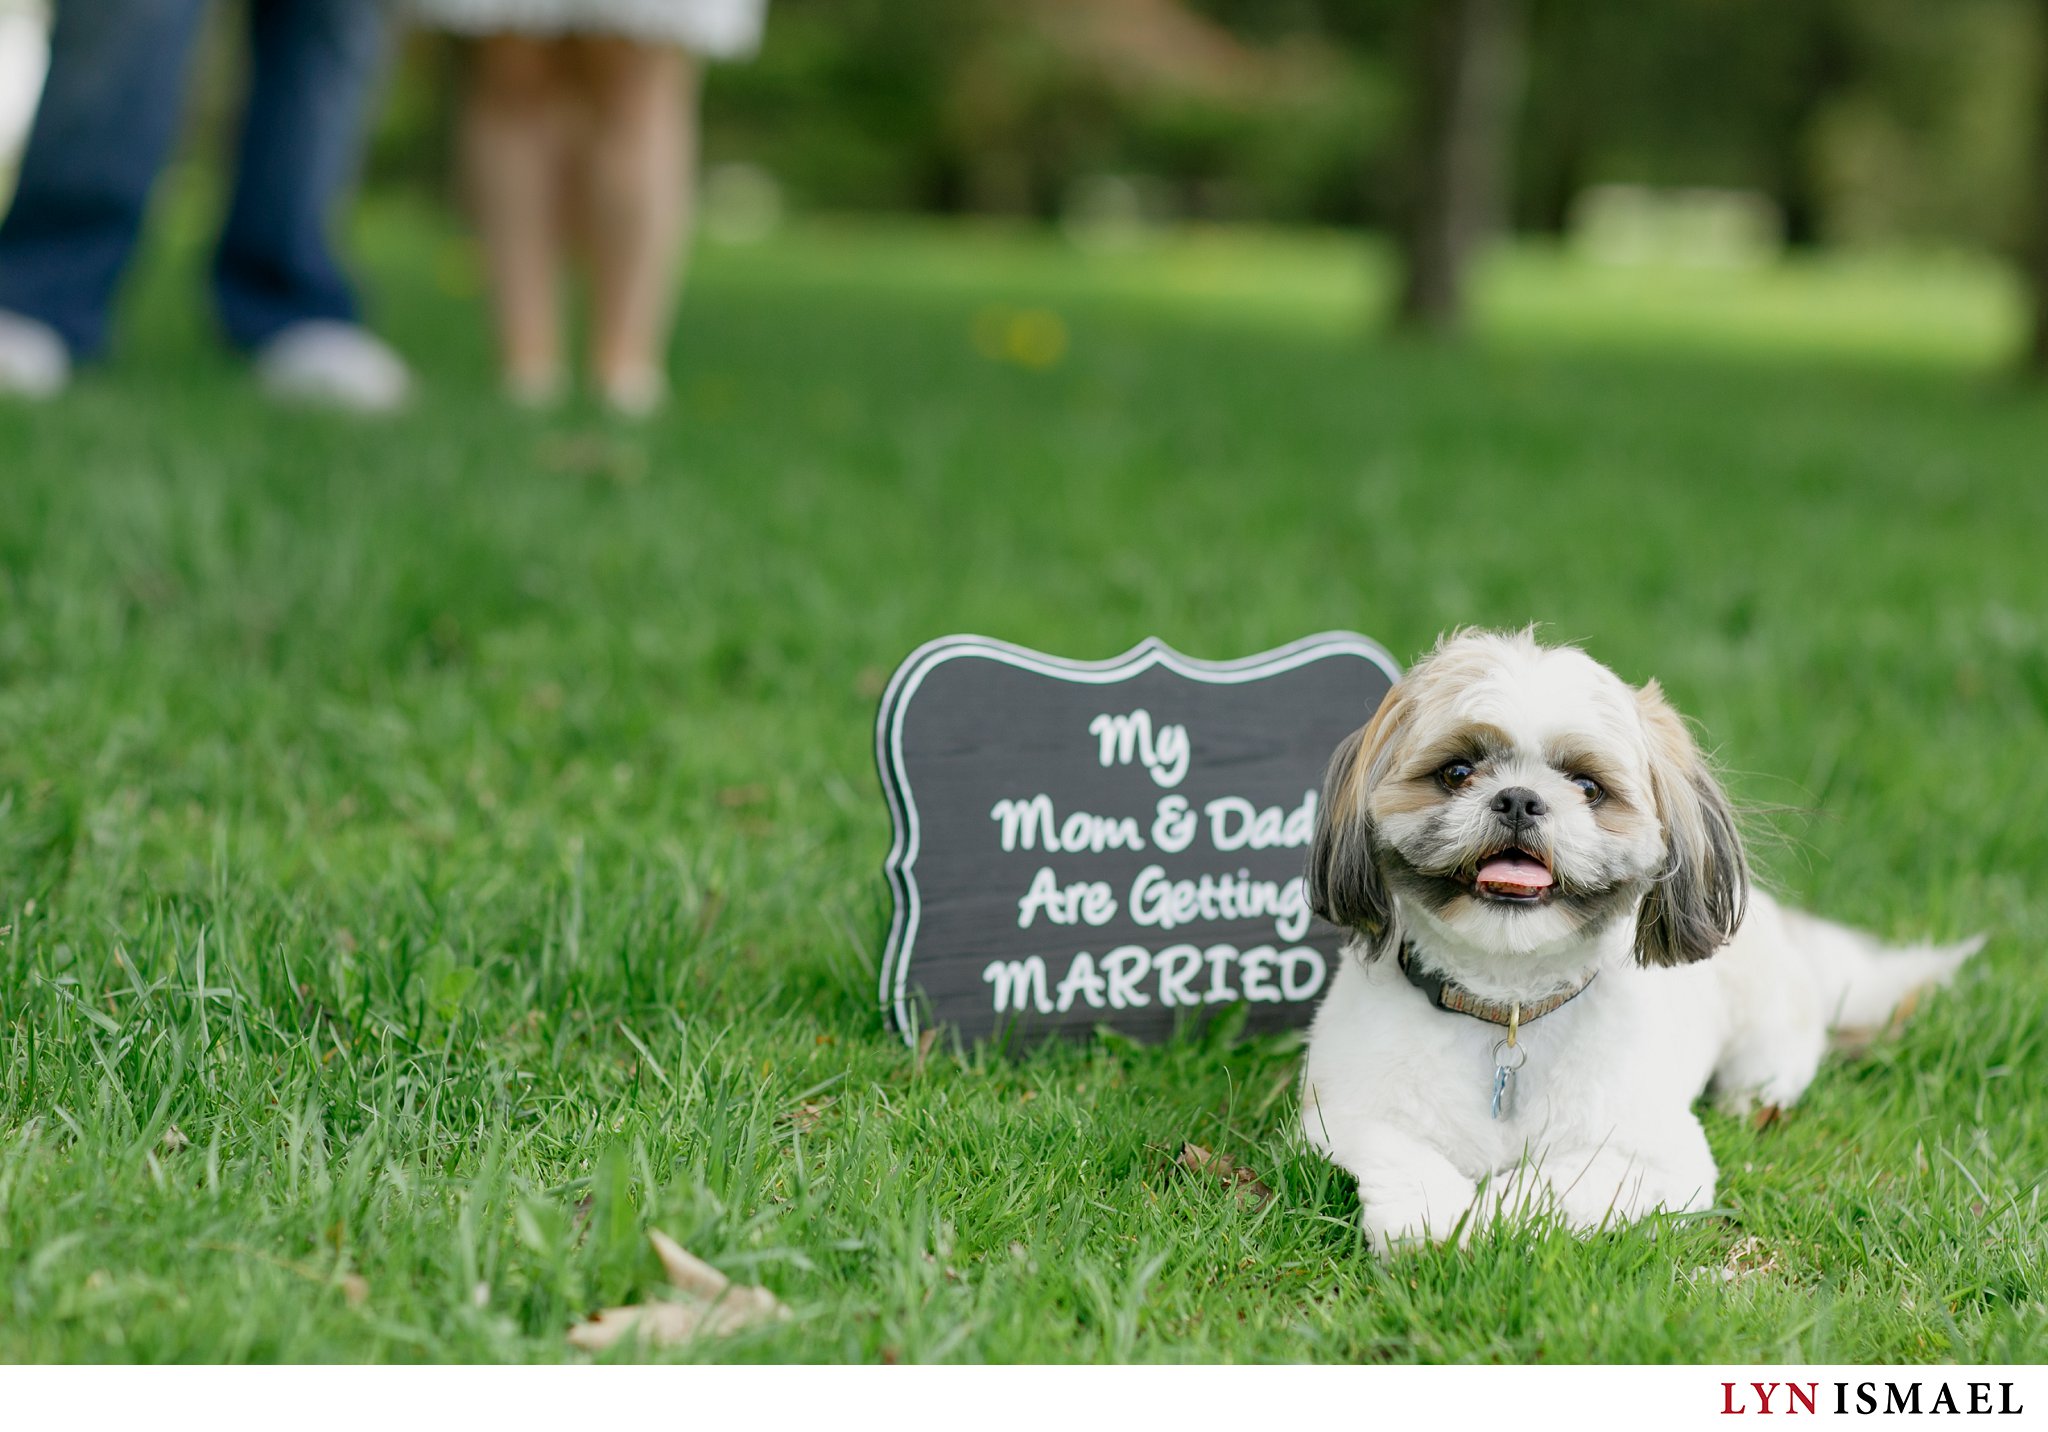 A cute Shit Szu puppy joins his owners' engagement session in Waterloo.